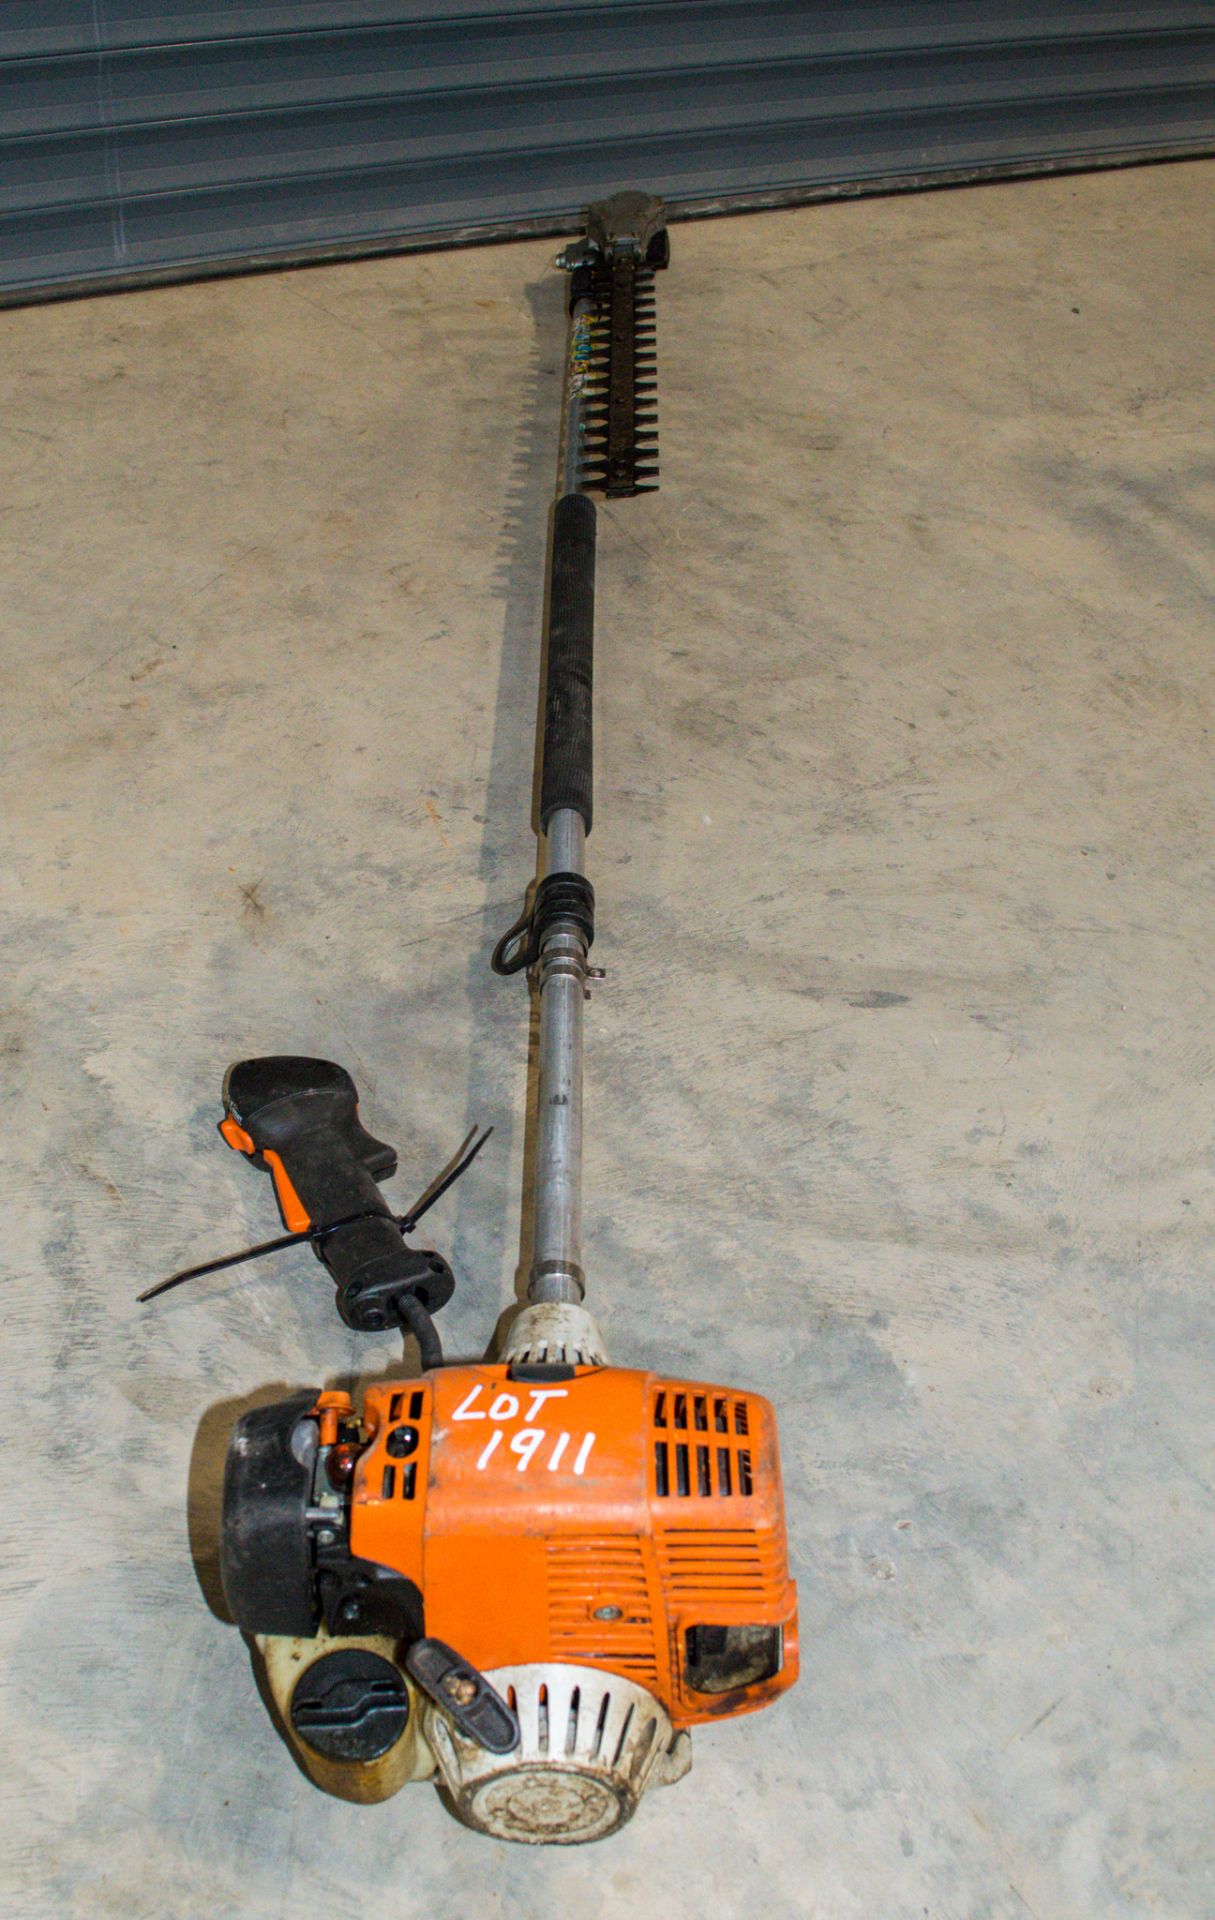 Stihl petrol driven long reach hedge trimmer 16050432 ** Handle unattached & damaged ** - Image 2 of 2